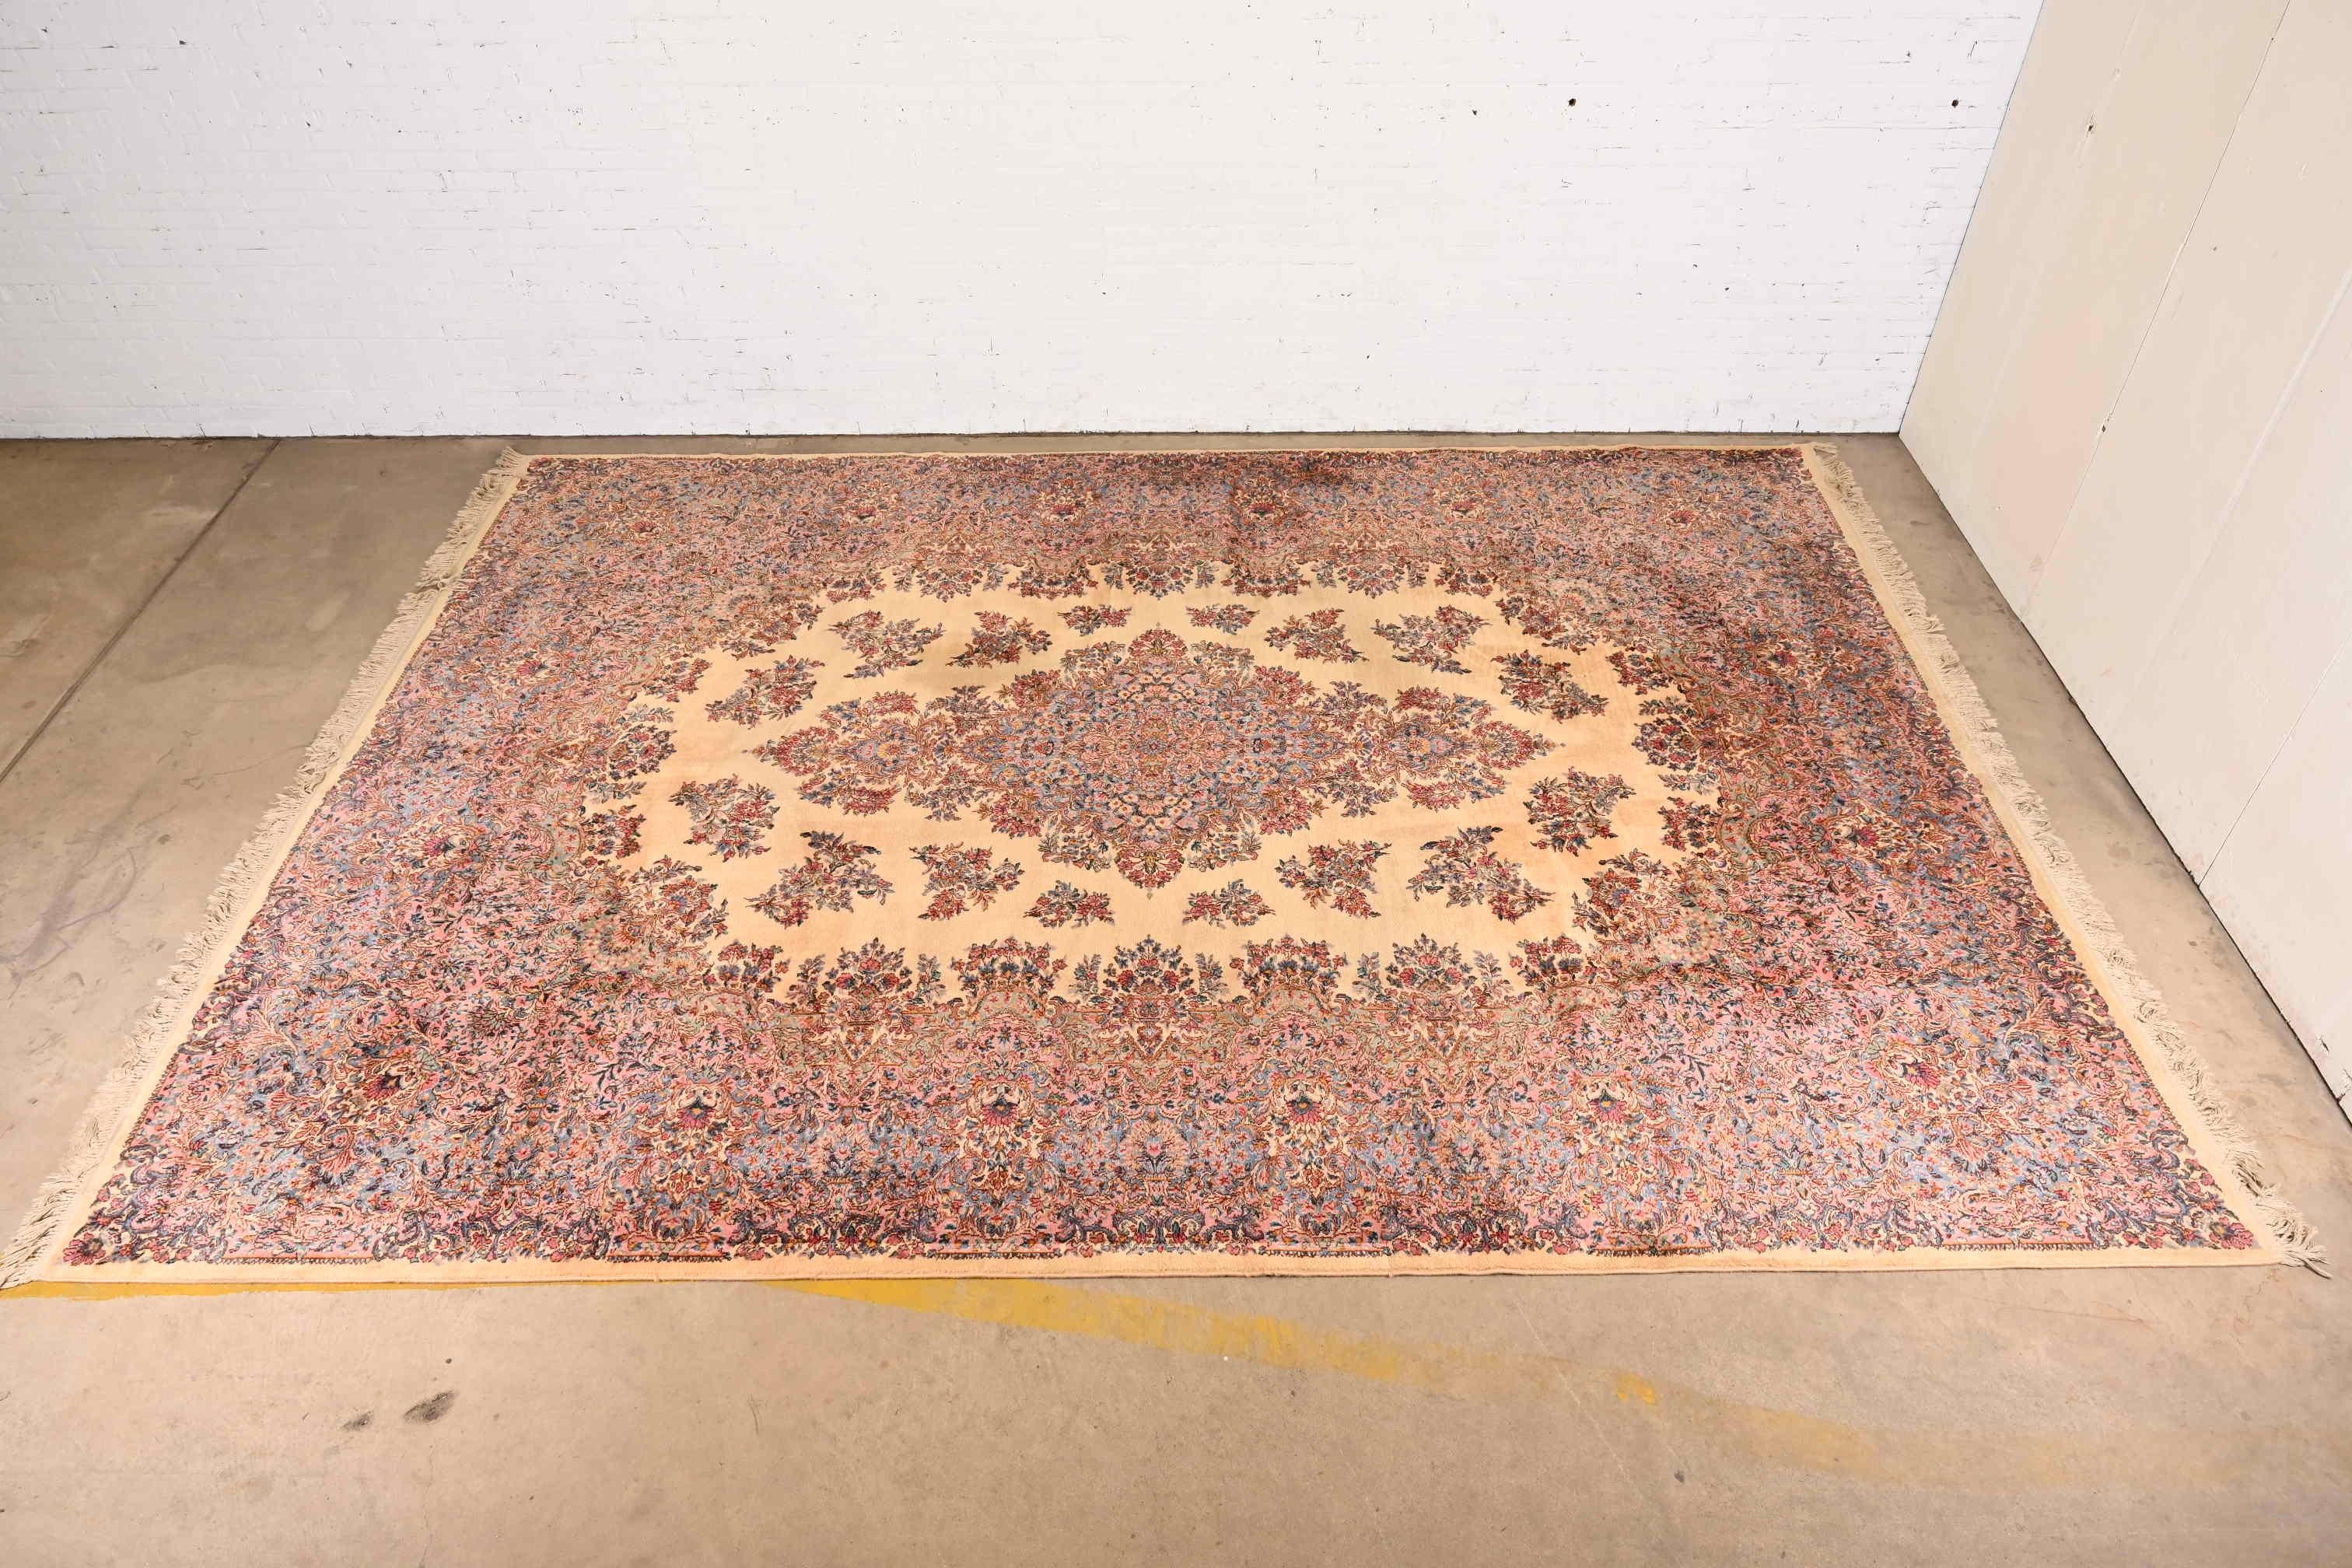 A gorrgeous Persian Kirman style room size wool area rug

By Karastan

USA, circa 1940s

Features a beautiful floral pattern, with center medallion. Predominant colors in pink, blue, and cream.

Measures: 11'6